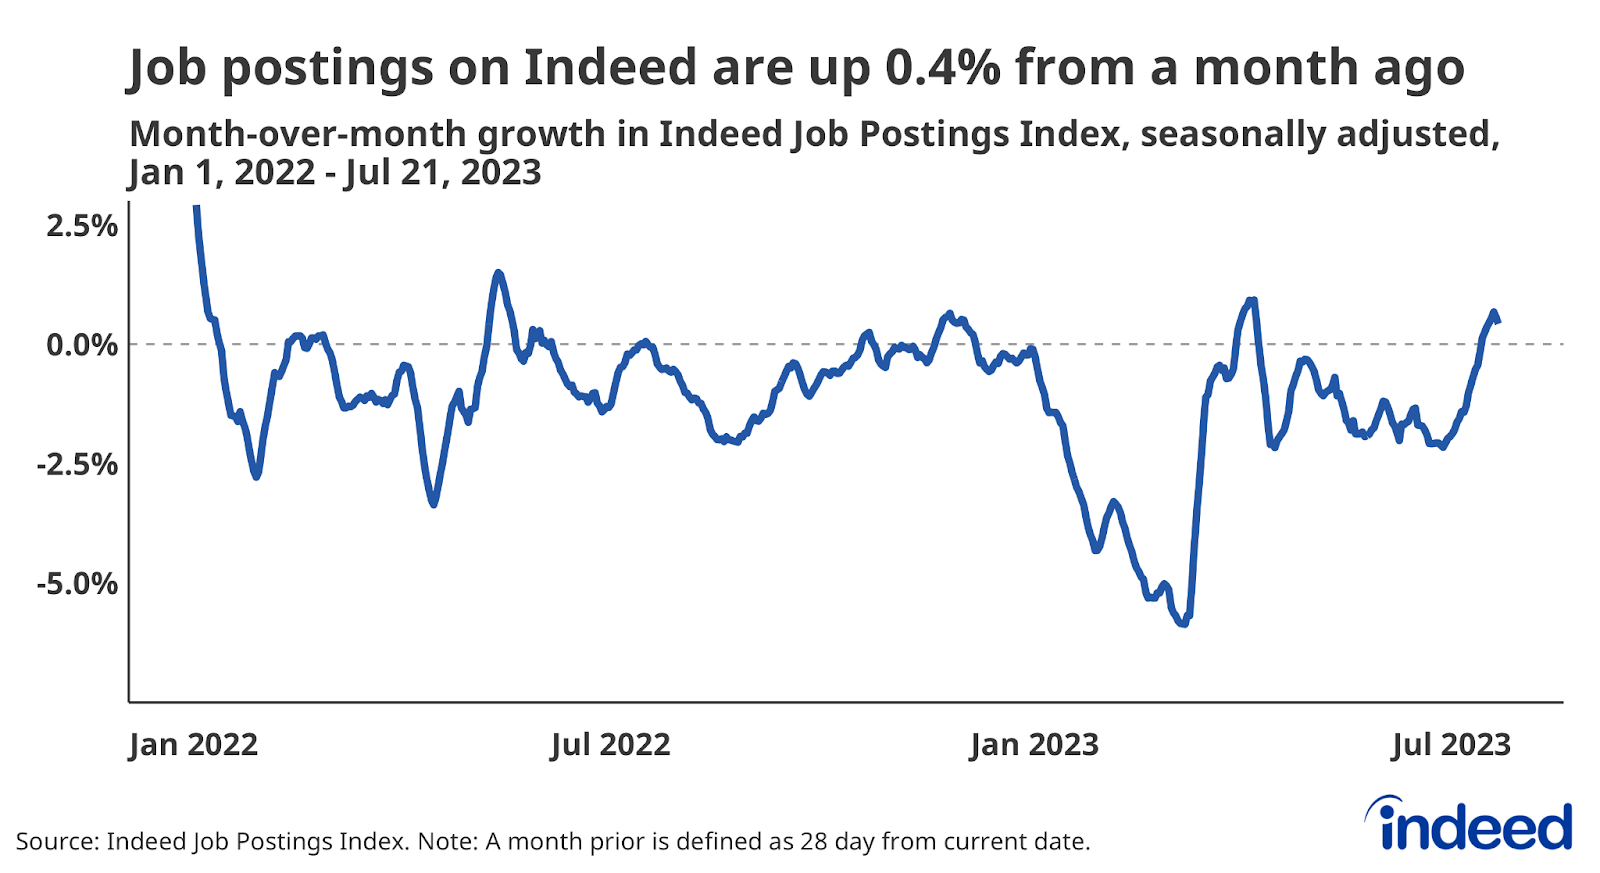 Line graph titled “Job postings on Indeed are up 0.4% from a month ago” with a vertical axis ranging from -5% to 2.5%. Total postings ticked up recently but have declined month-over-month for most of 2023.